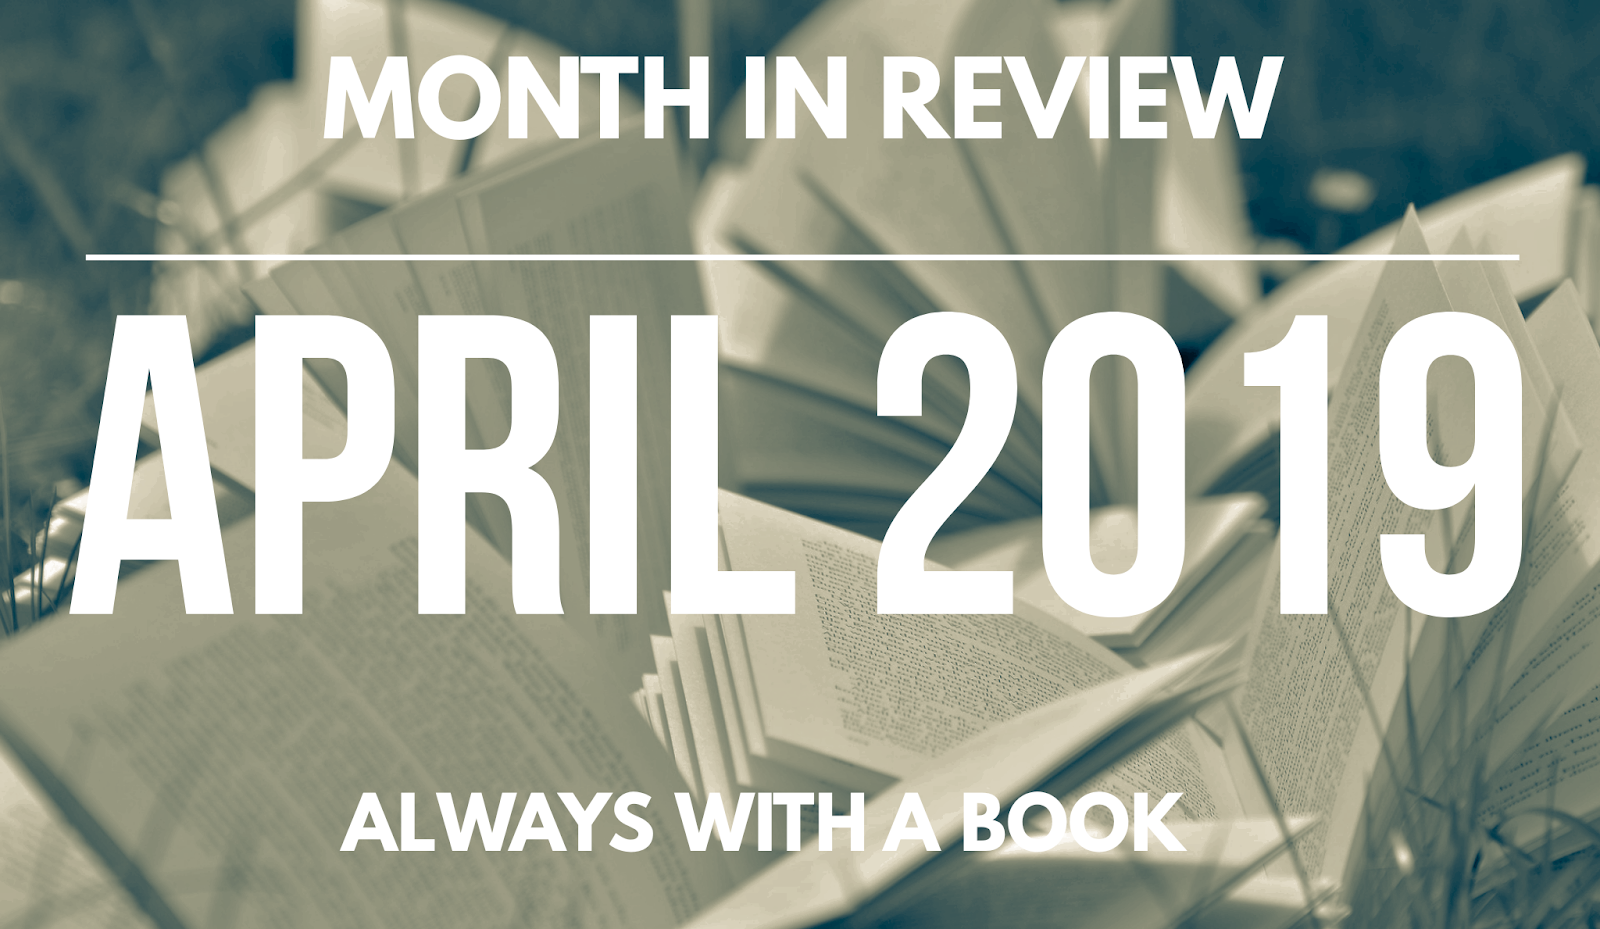 Month in Review: April 2019